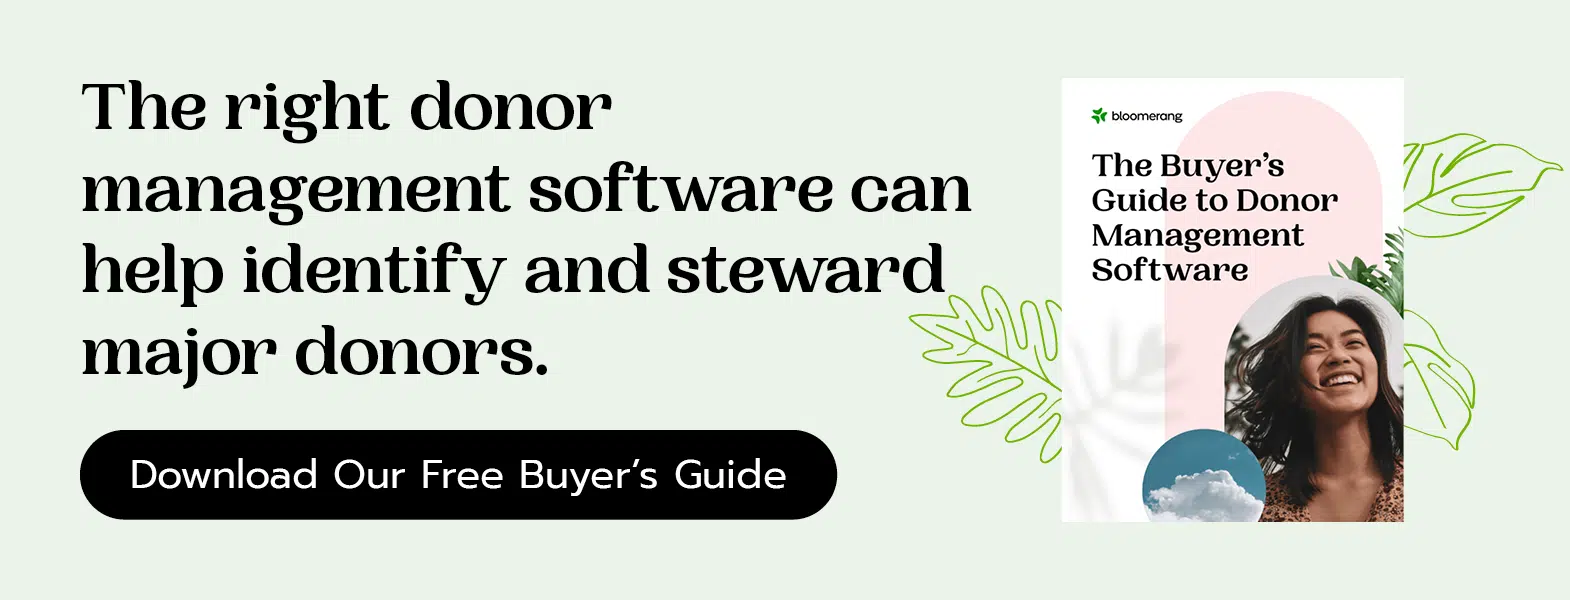 The right donor management software can help identify and steward major donors. Download our free buyers’ guide to donor management software by clicking here.